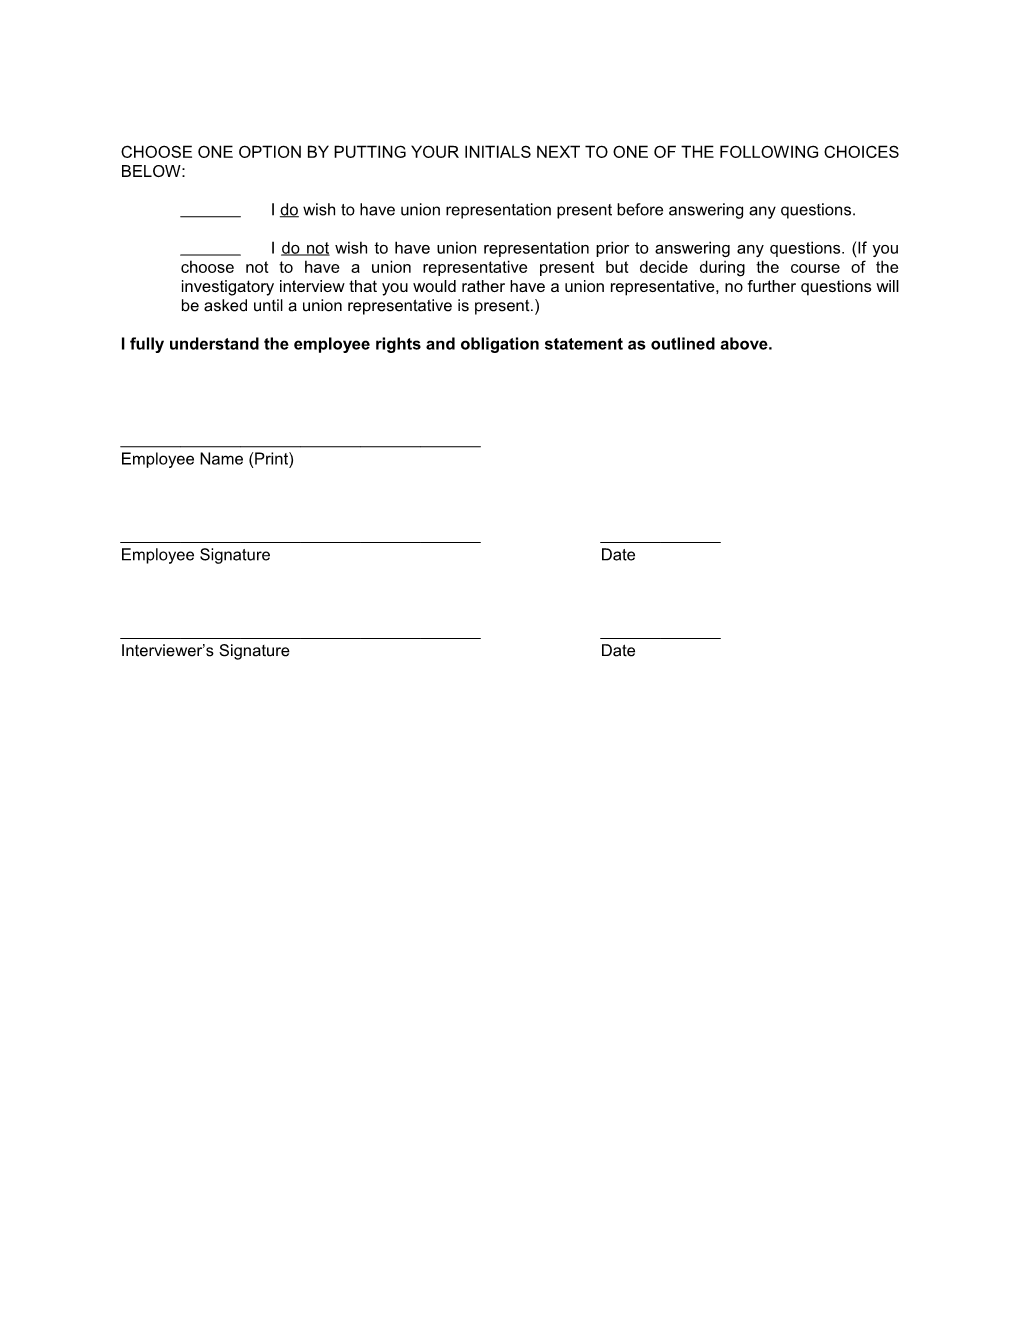 Employee Rights and Obligation Statement